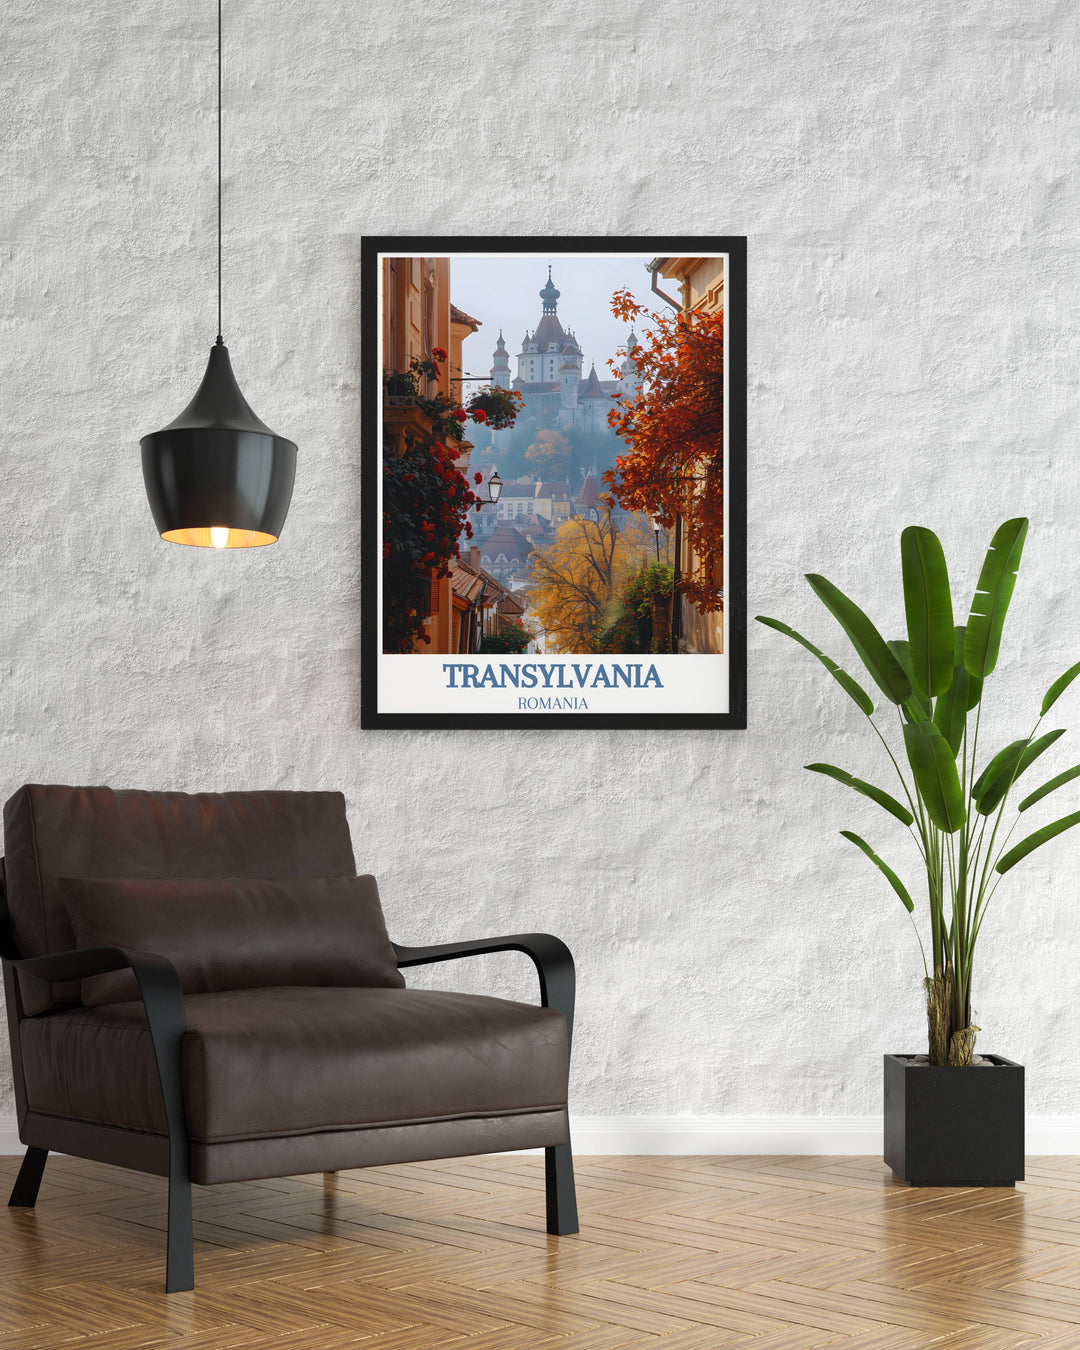 Captivating artwork of Sighișoara Citadel, capturing the medieval splendor of this historic town in a high quality print, perfect for celebrating Transylvanias rich cultural heritage.